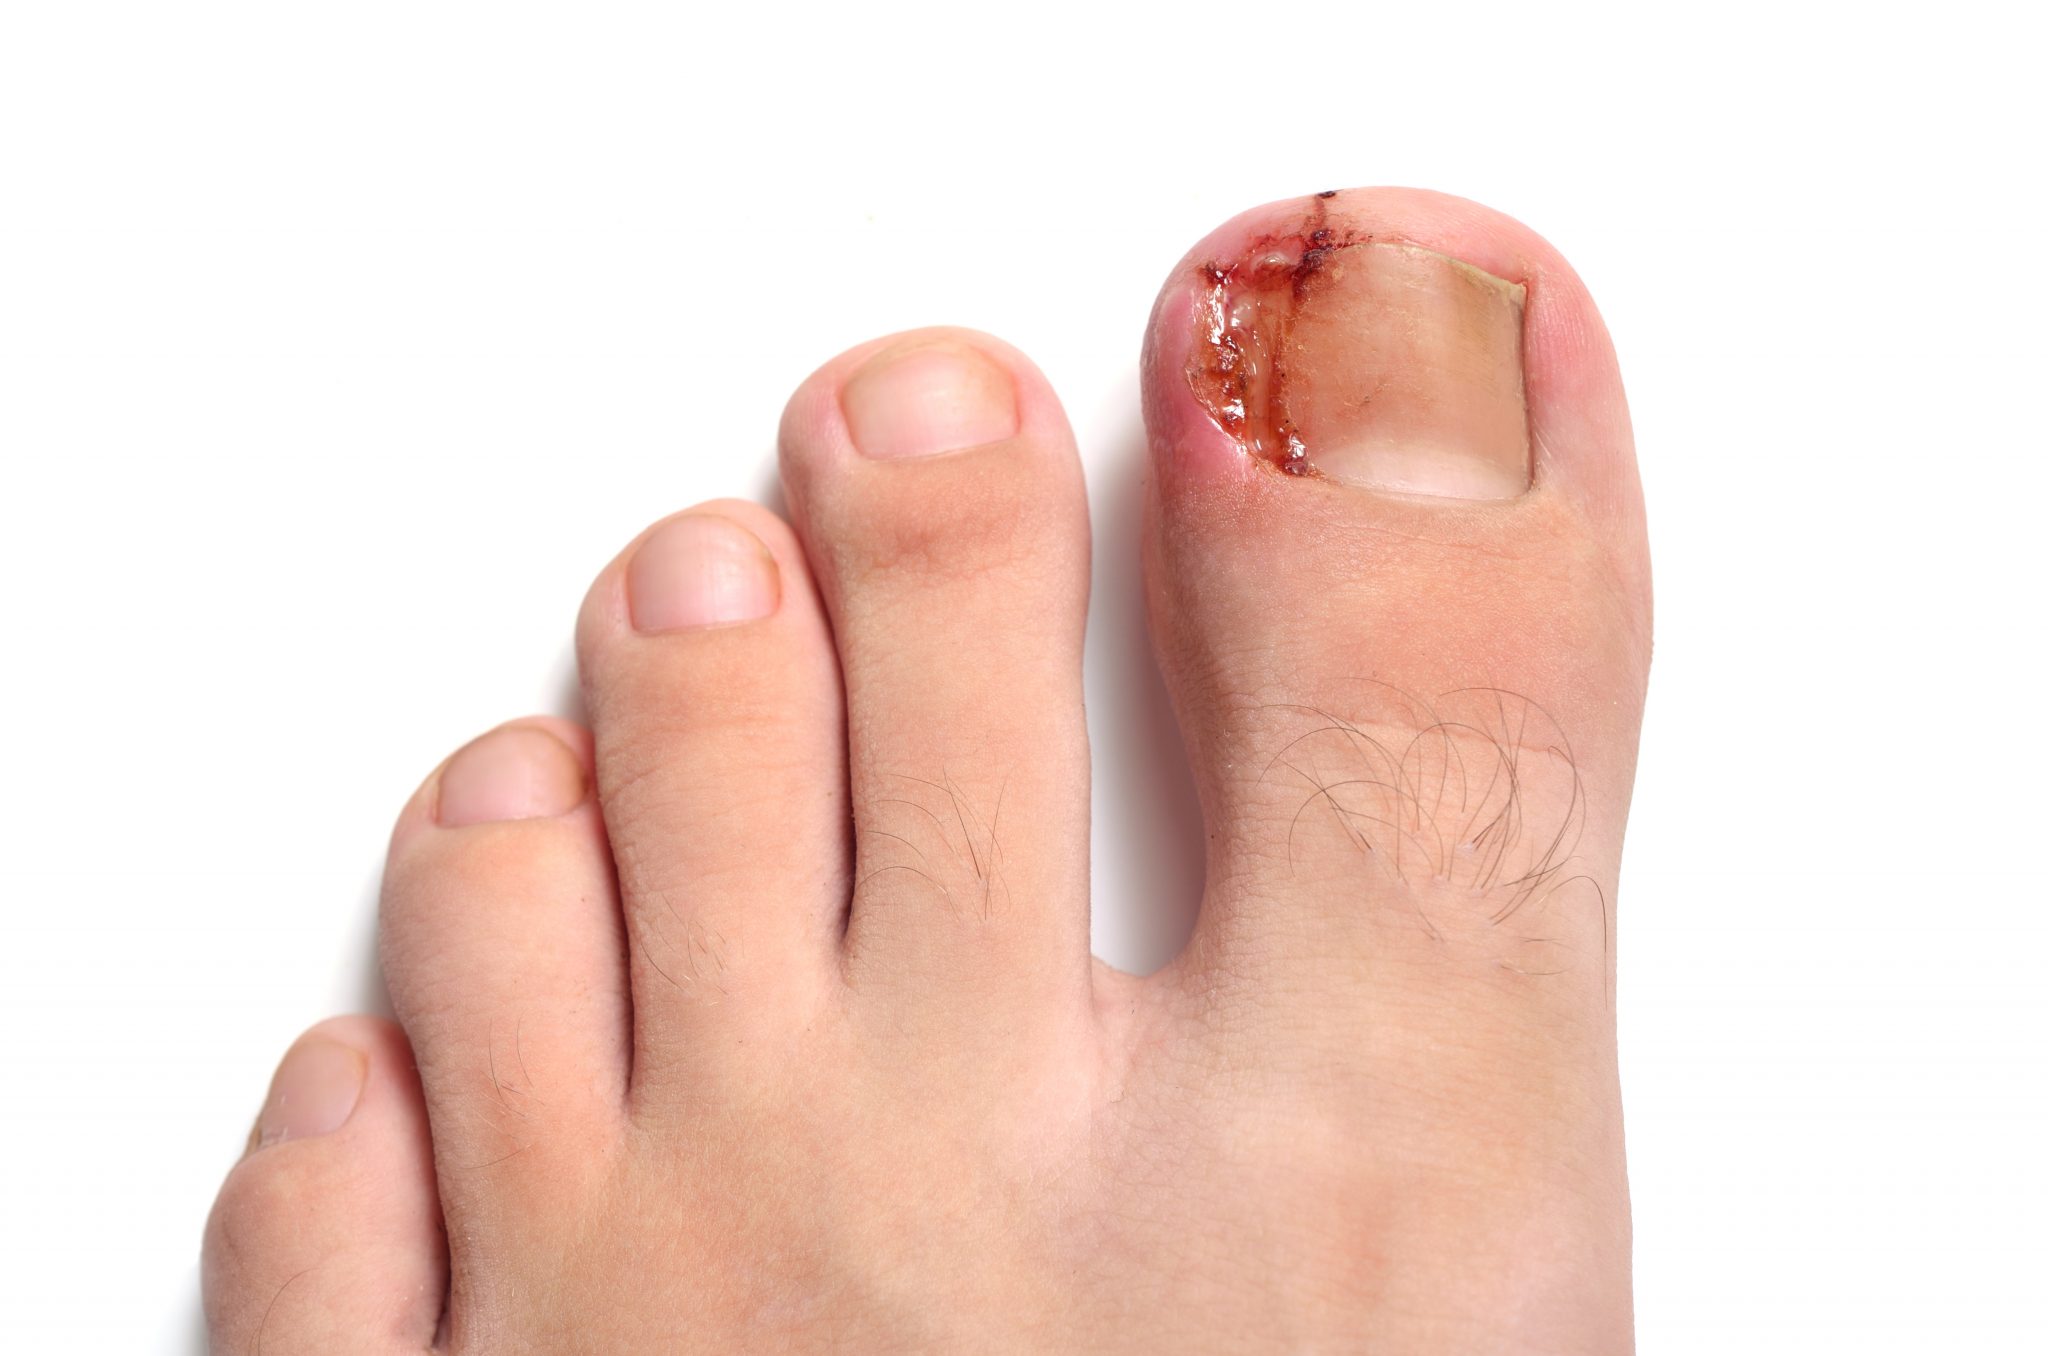 Ouch! How To Fix Ingrown Toenails Now My FootDr